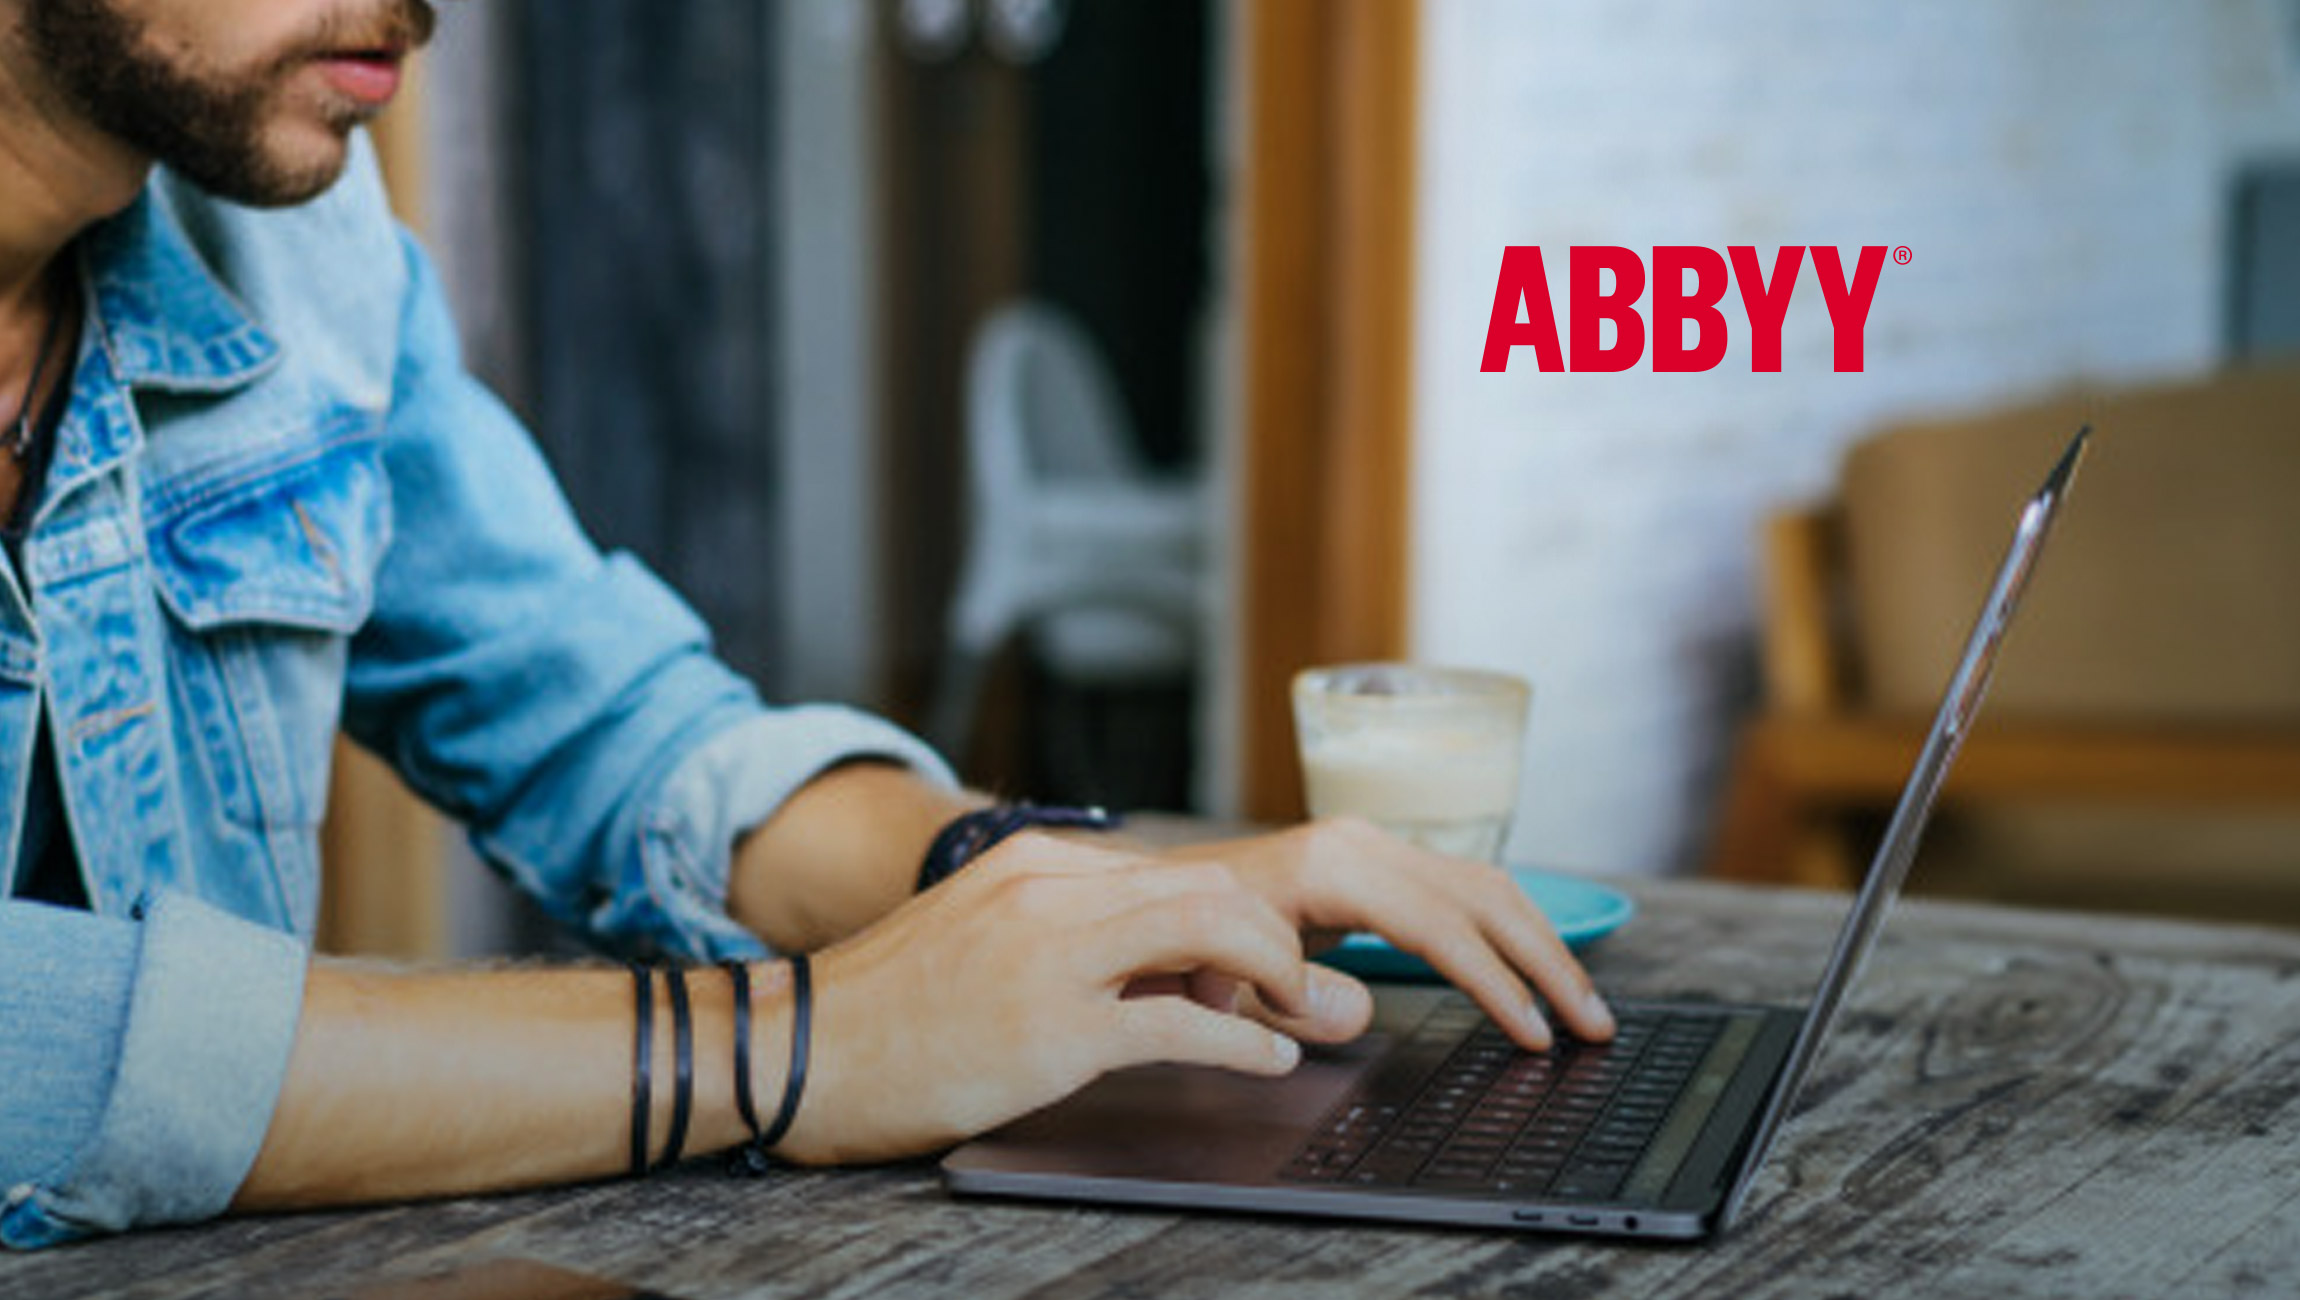 ABBYY Expands Intelligent Automation Innovation with New Development Center in Serbia